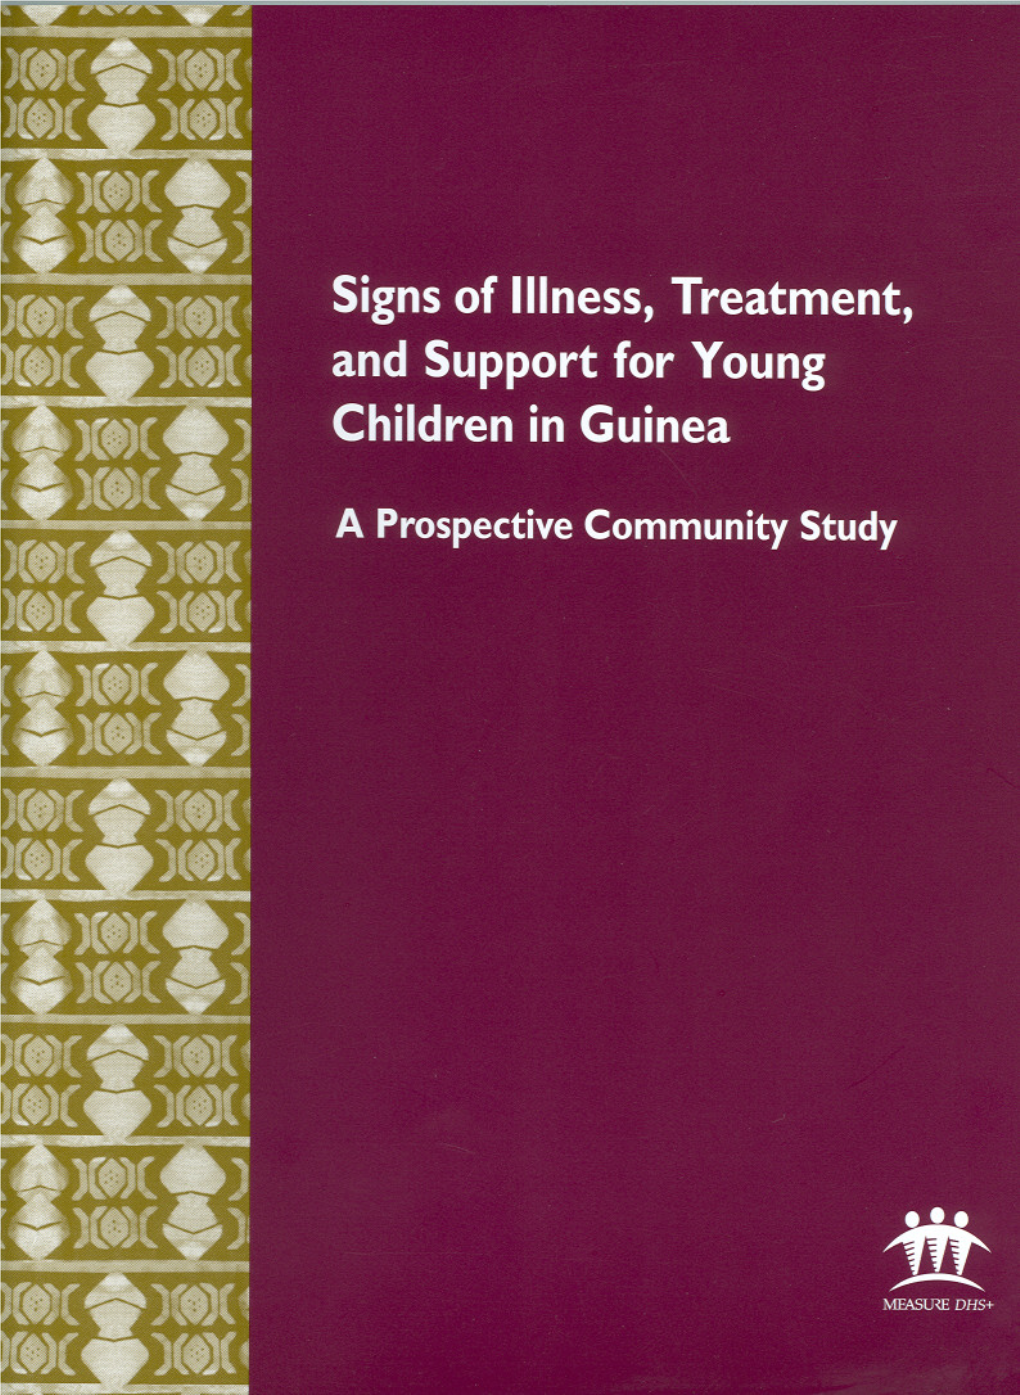 Signs of Illness, Treatment, and Support for Young Children in Guinea: a Prospective Community Study